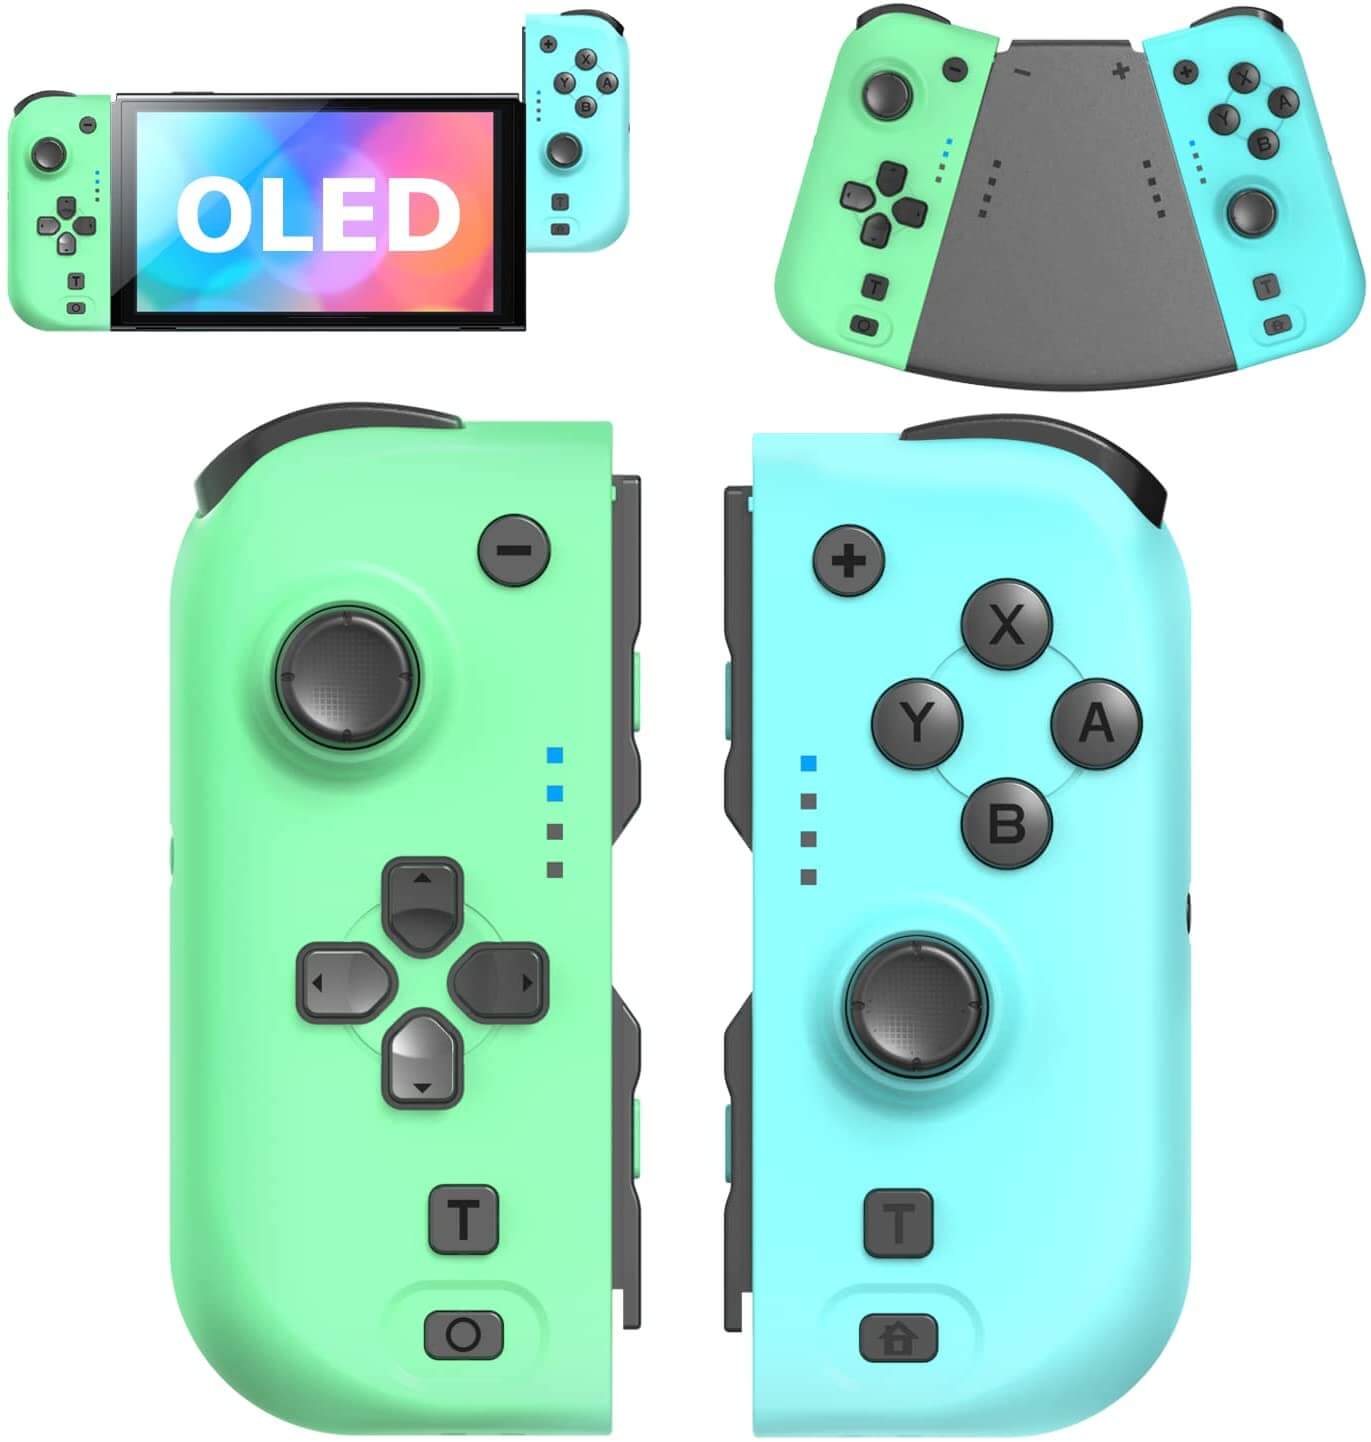 Switch Joy Pad Controller for Nintendo Switch/Switch OLED Model ...